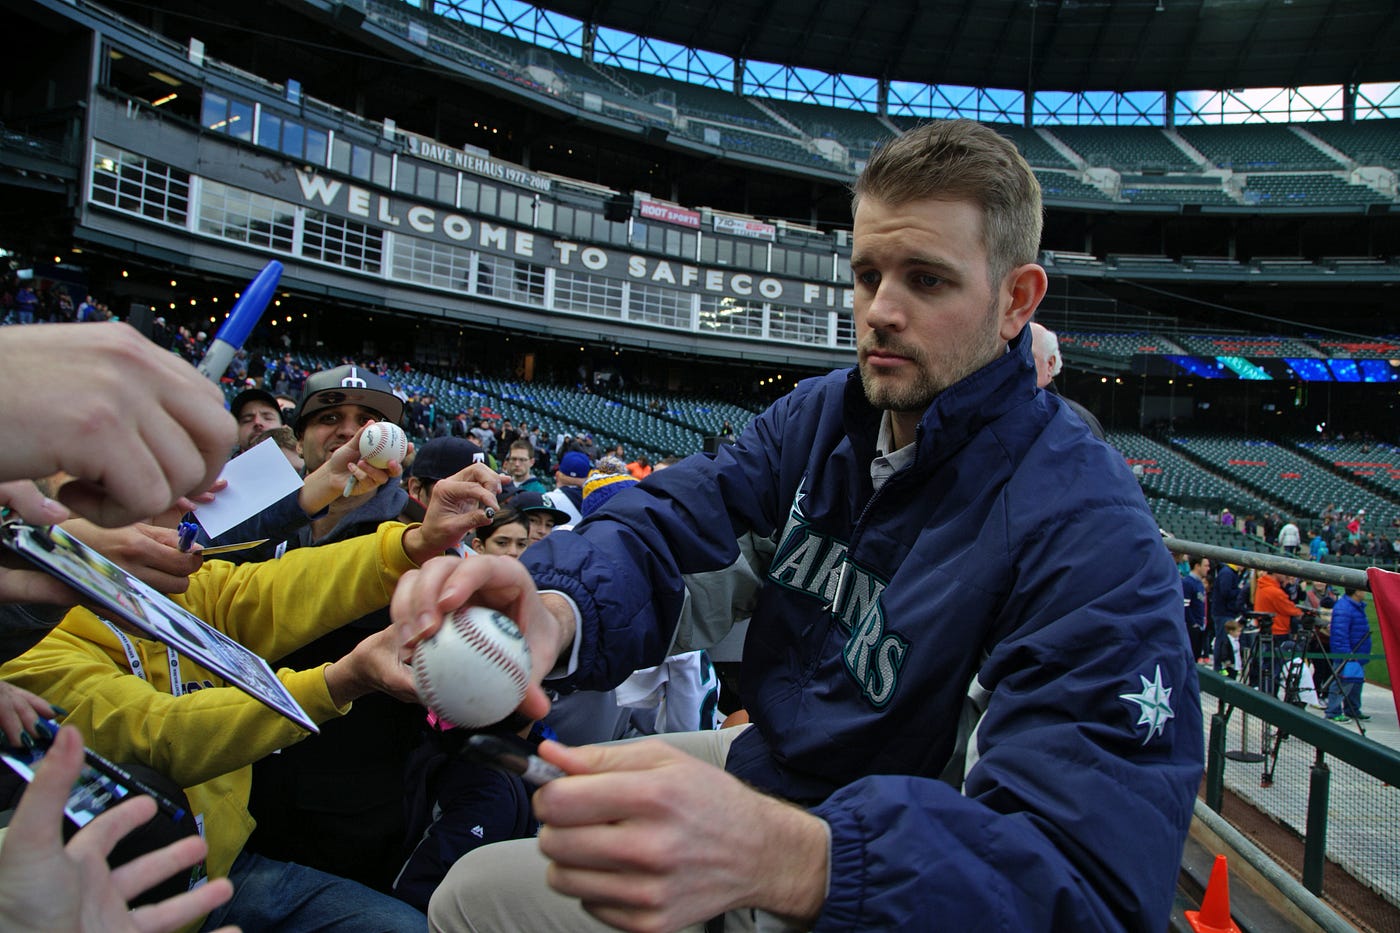 Mariners Team Store Holiday Events, by Mariners PR